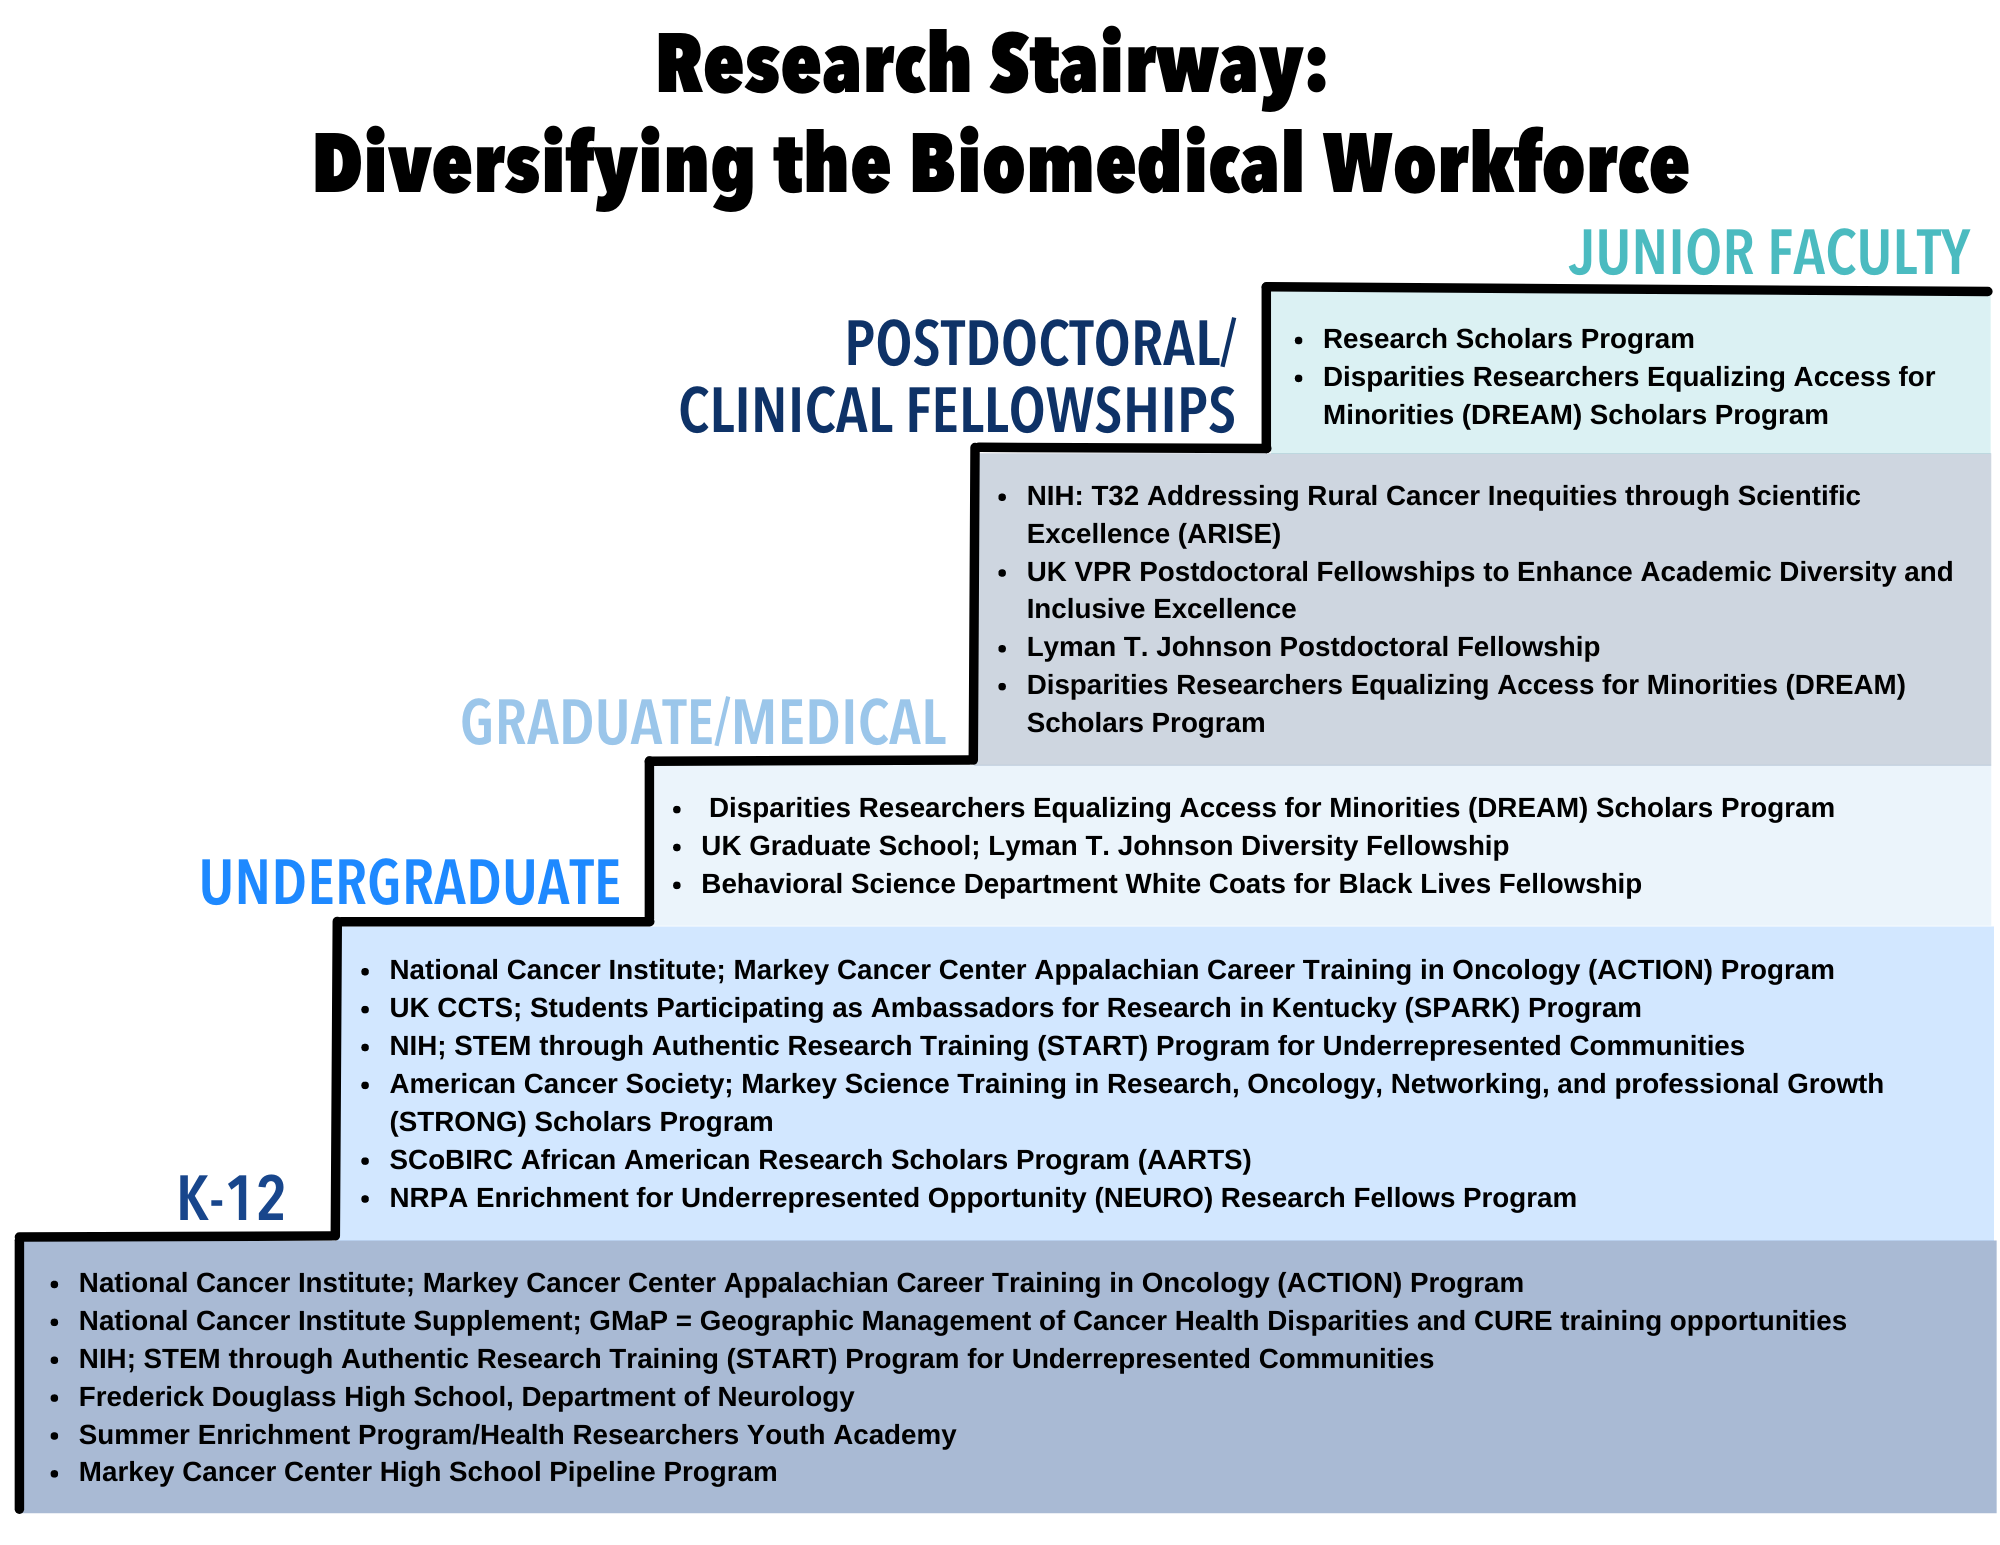 Research Stairway graphic